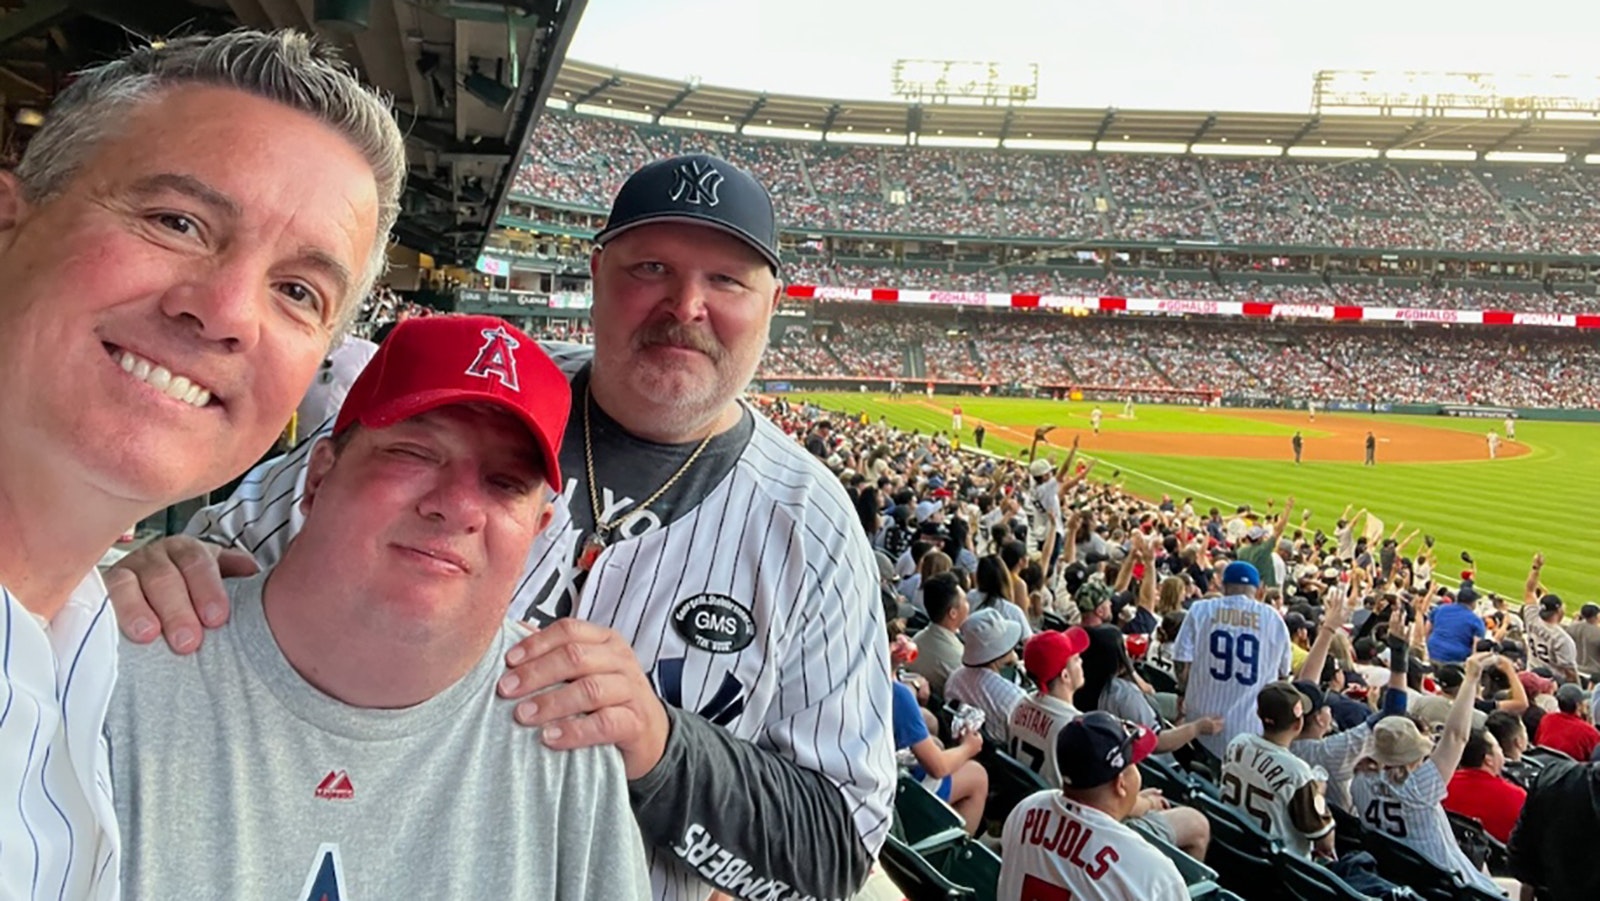 Dreams in Motion honored Lance Beckert, right, of Utah in July 2023 when the Yankees played the Angels in California. He is pictured with co-founders Joel Brown, left, and Bruce Tippets.